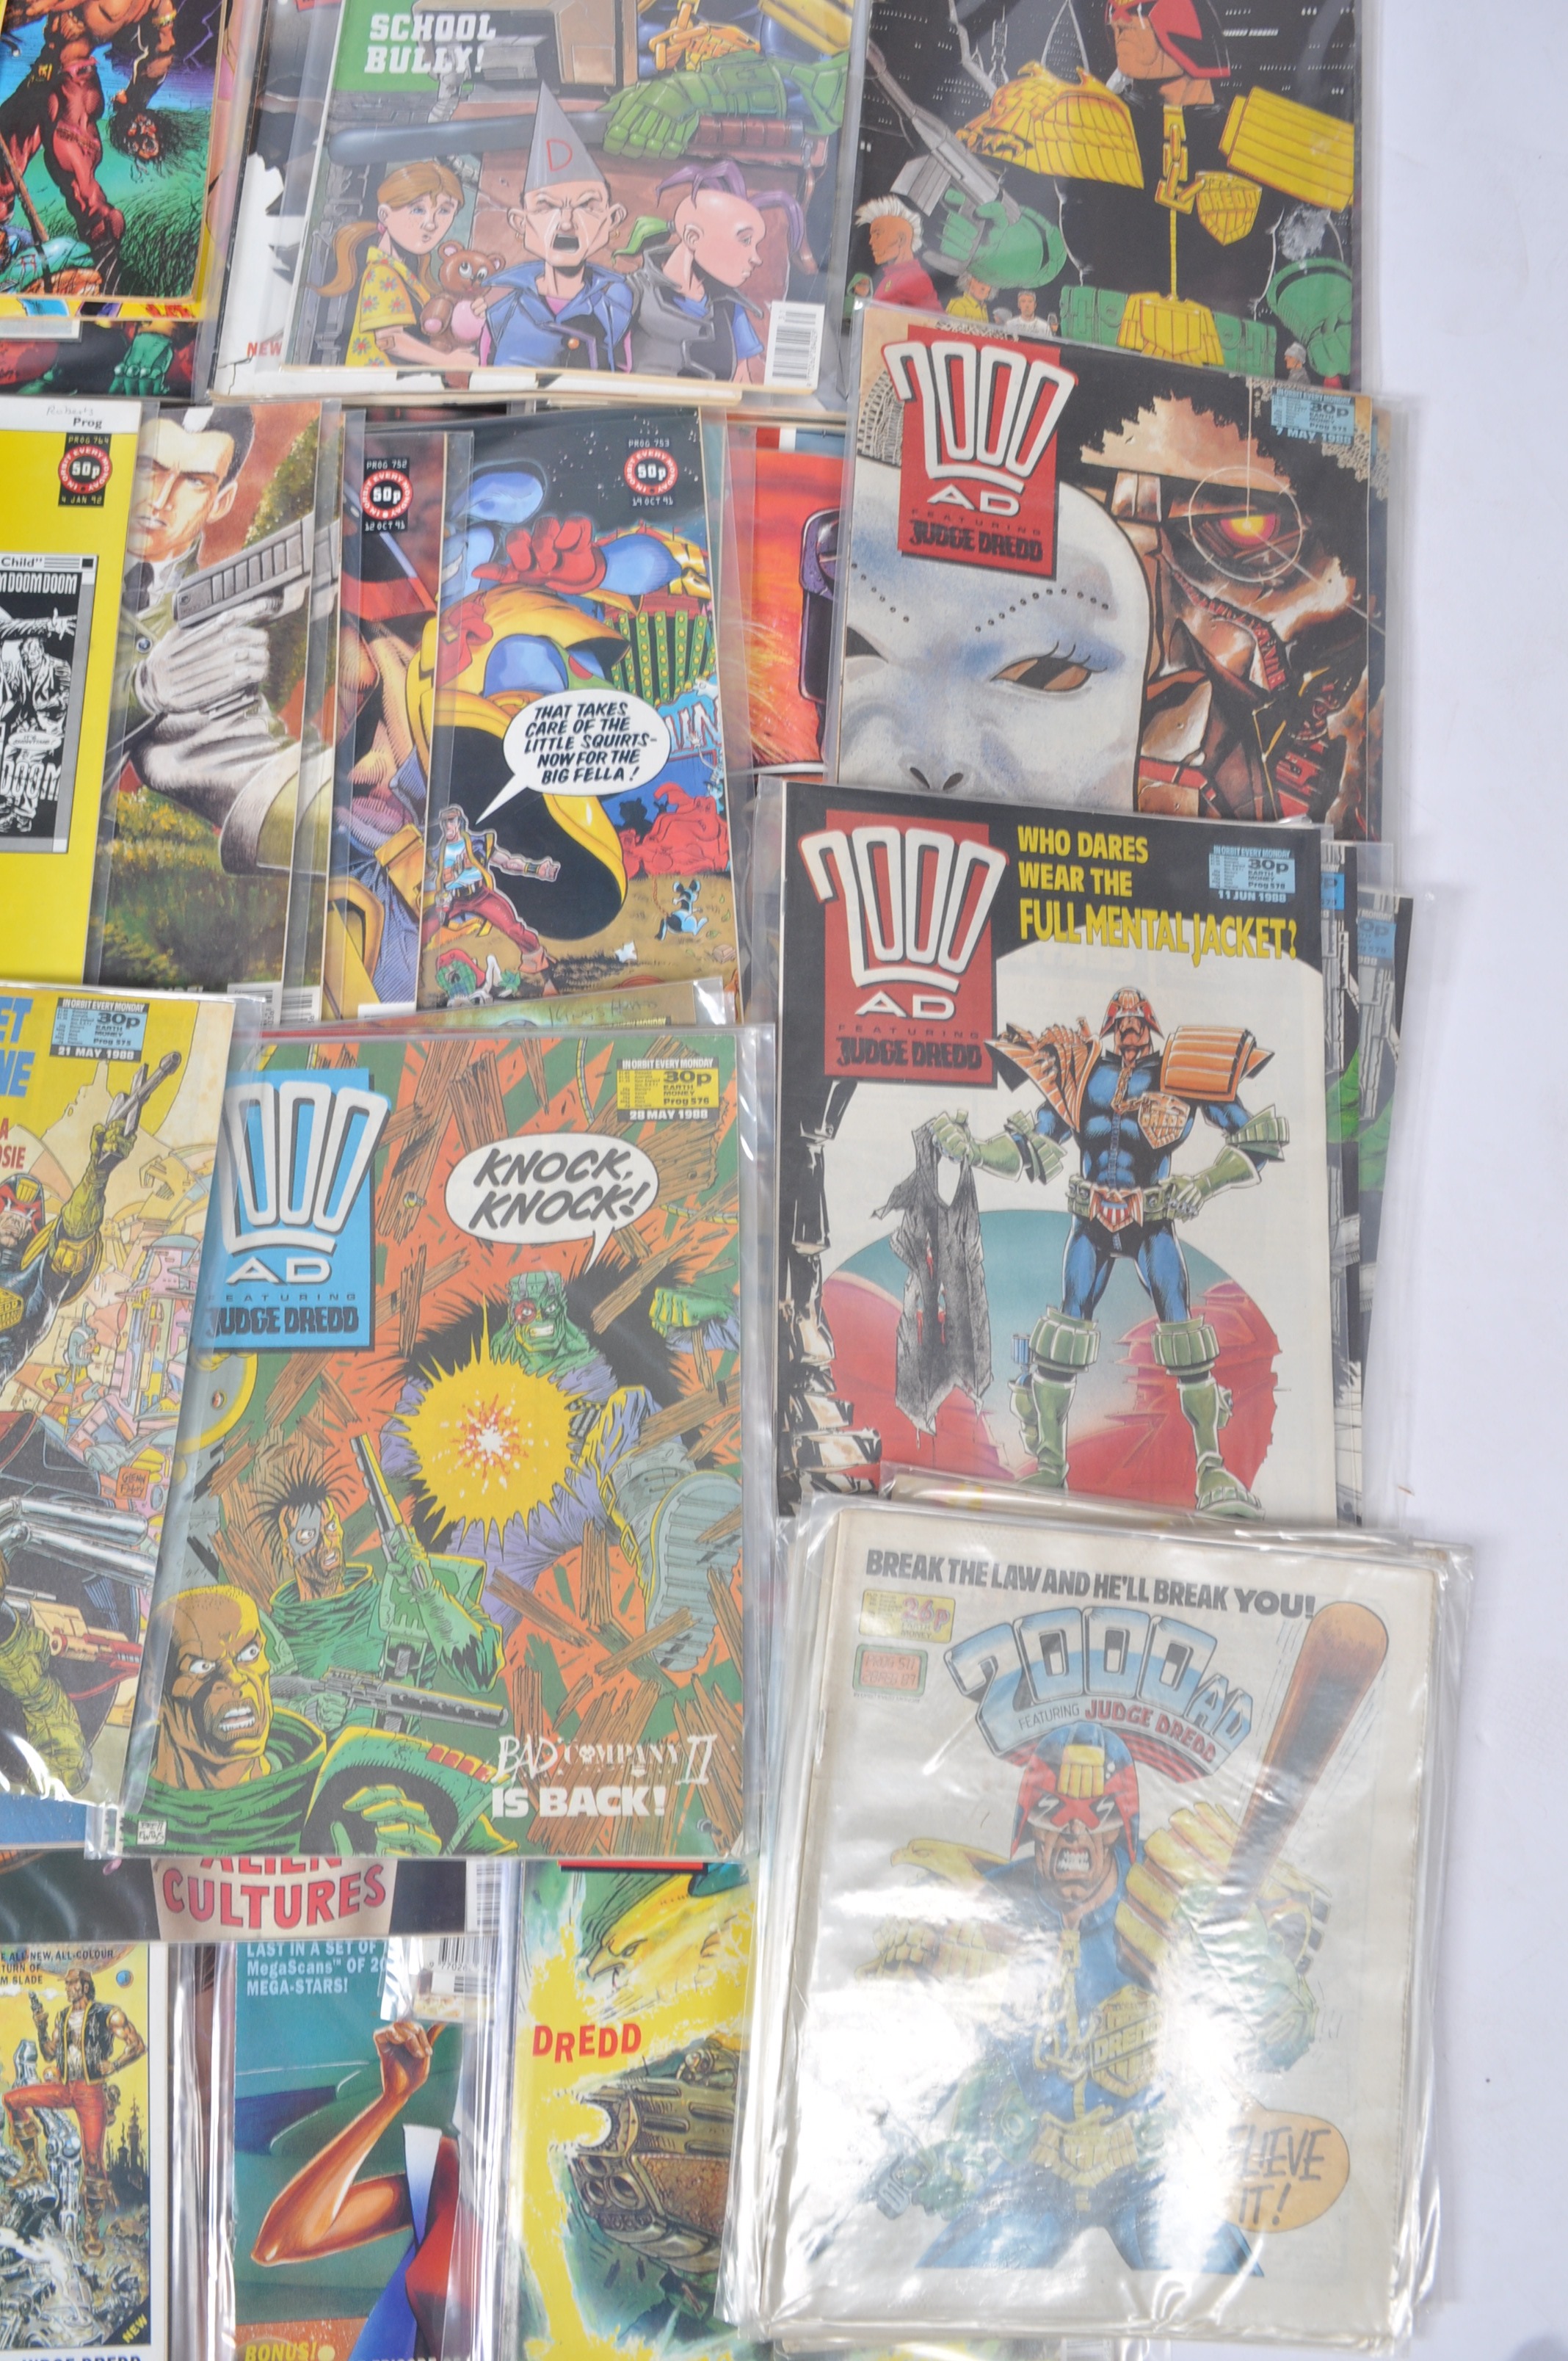 COMIC BOOKS - 2000AD - LARGE COLLECTION OF VINTAGE COMIC BOOKS - Image 4 of 17